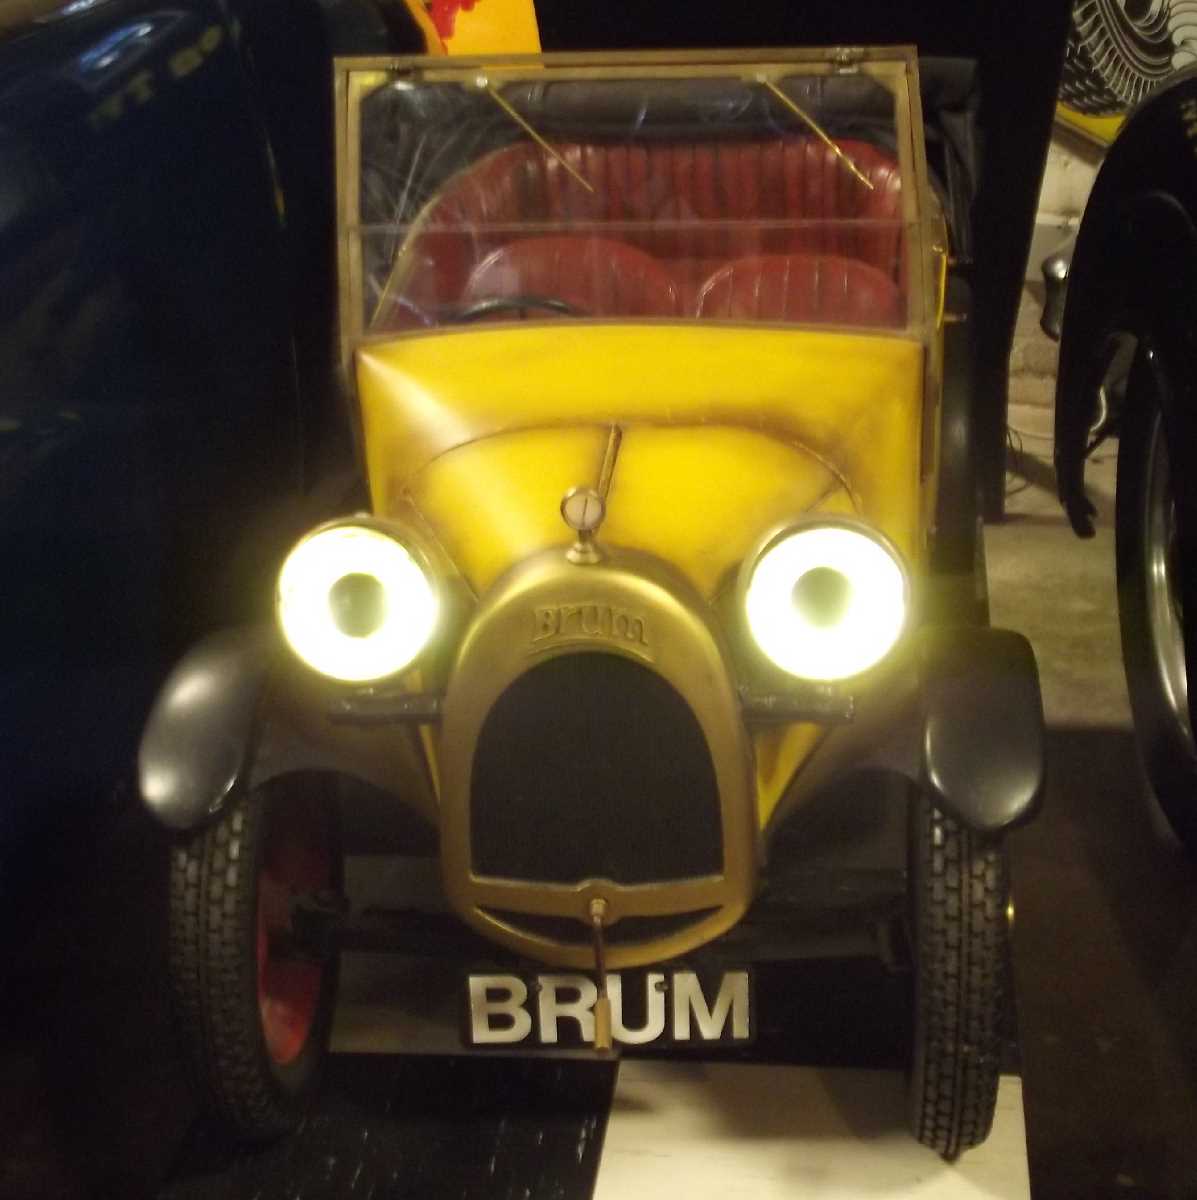 BRUM! at the Cotswold Motoring Museum in Bourton-on-the-Water, Gloucestershire